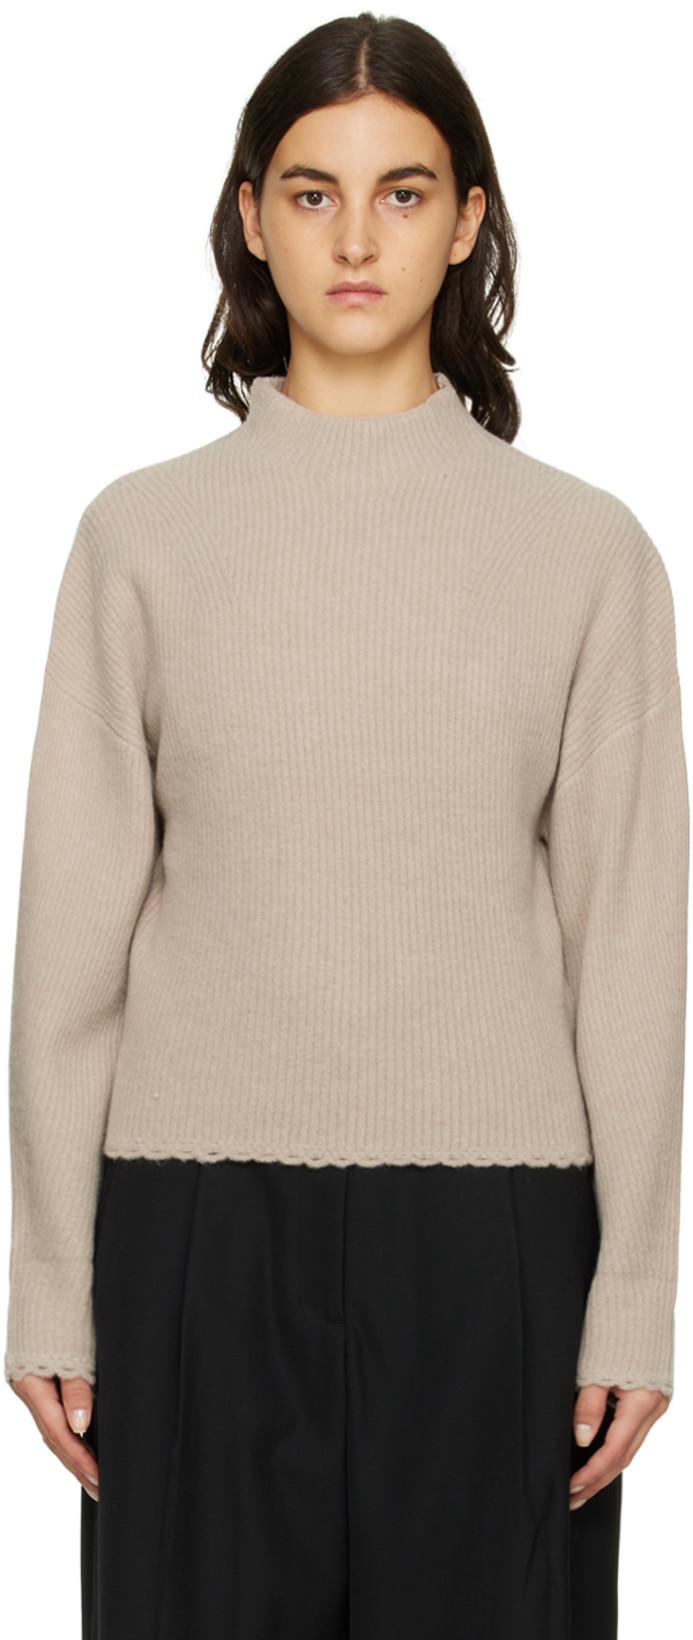 Taupe Scalloped Turtleneck by 3.1 PHILLIP LIM